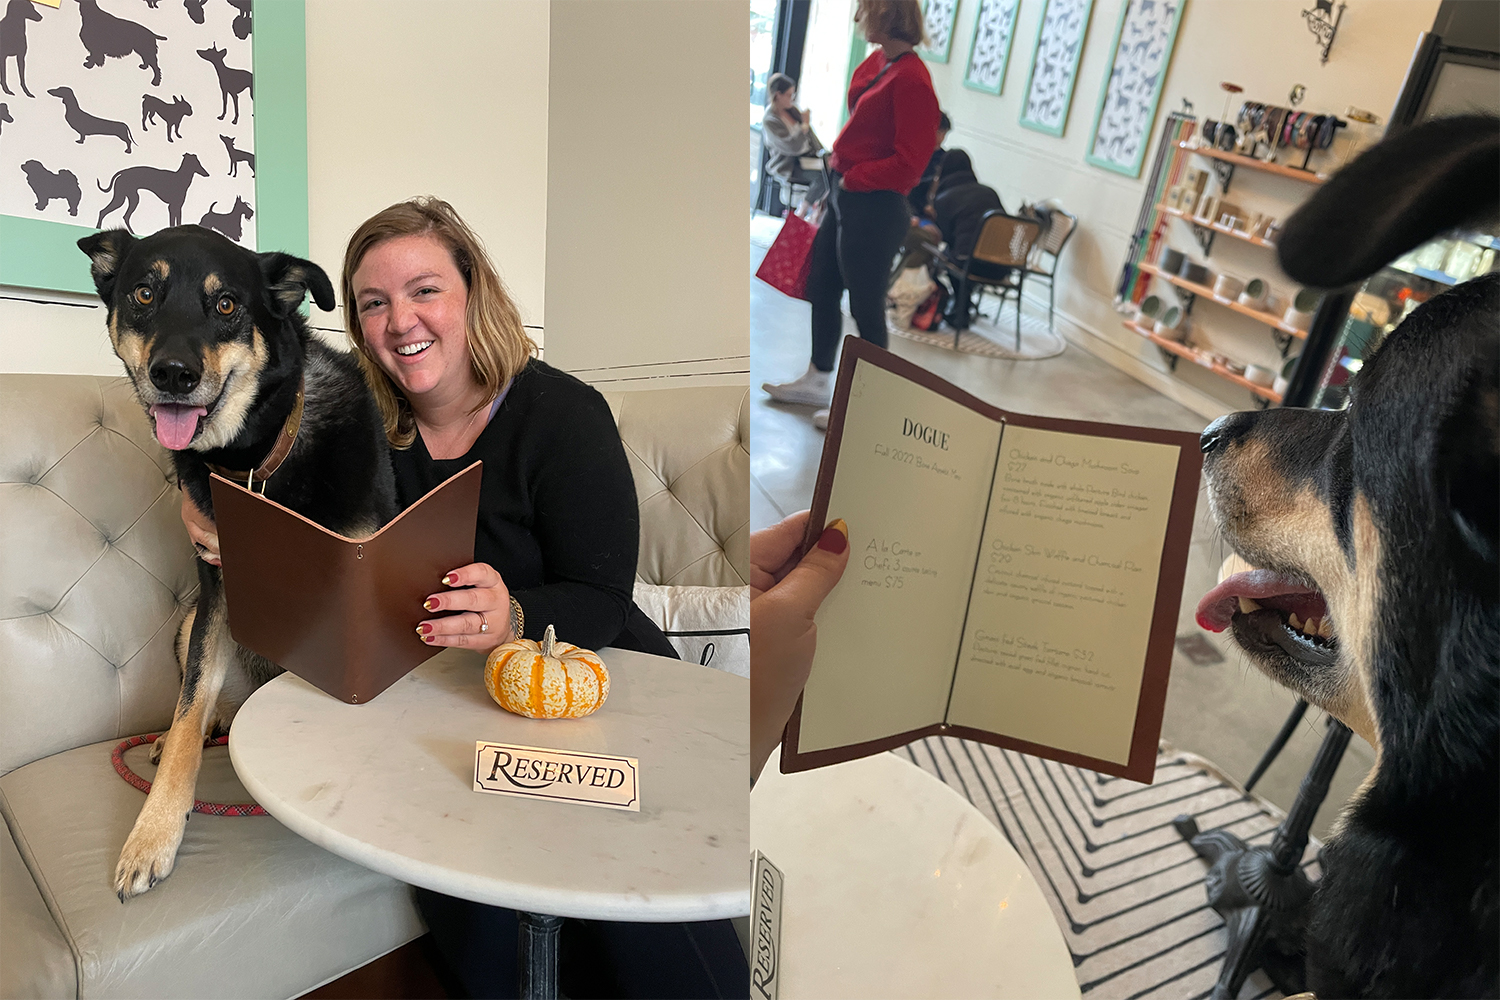 Writer Ali Wunderman and her dog Vinny looking over the menu at Bone Appetit Cafe at Dogue in San Francisco